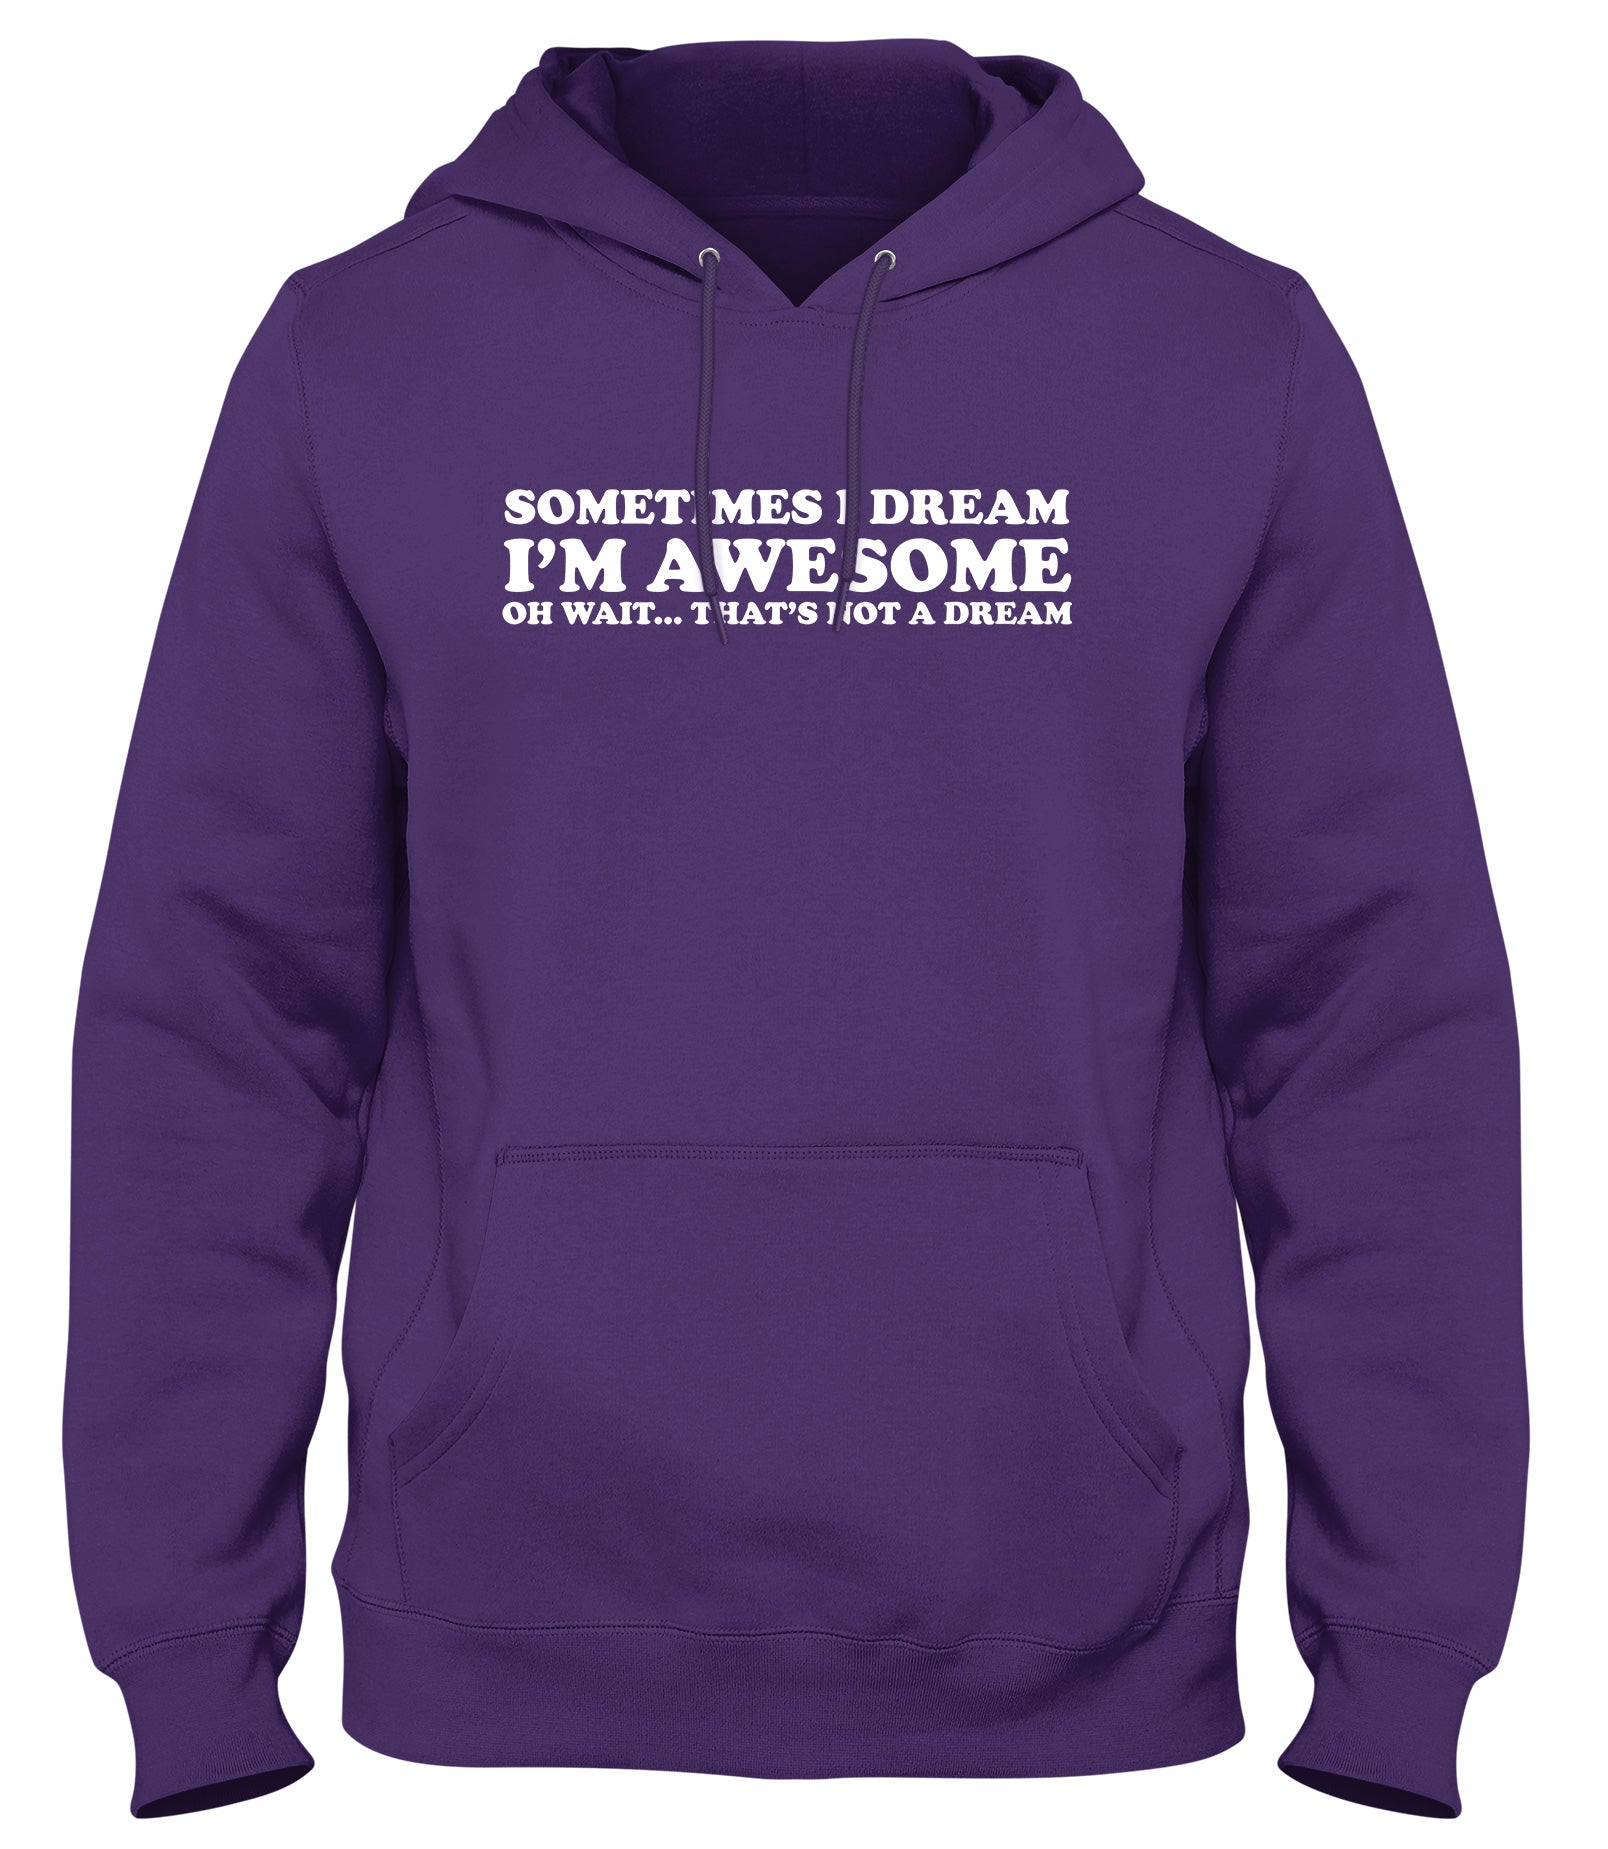 SOMETIMES I DREAM I'M AWESOME OH WAIT...THAT'S NOT A DREAM MENS WOMENS LADIES UNISEX FUNNY SLOGAN HOODIE